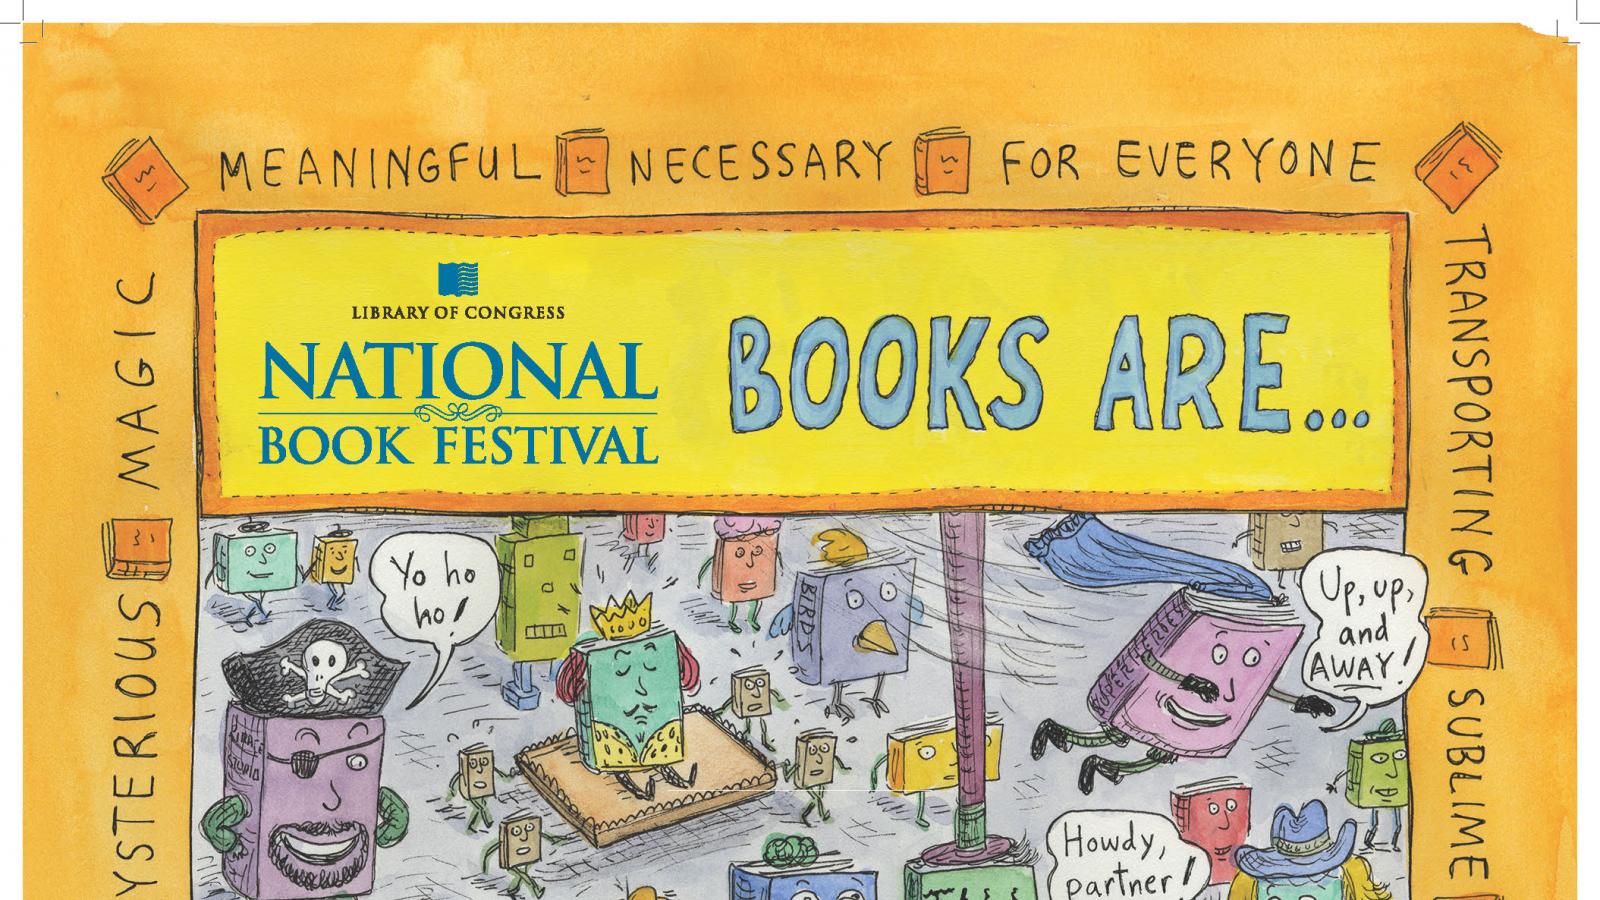 2017 National Book Festival Poster of Cartoon Books in a Crowd